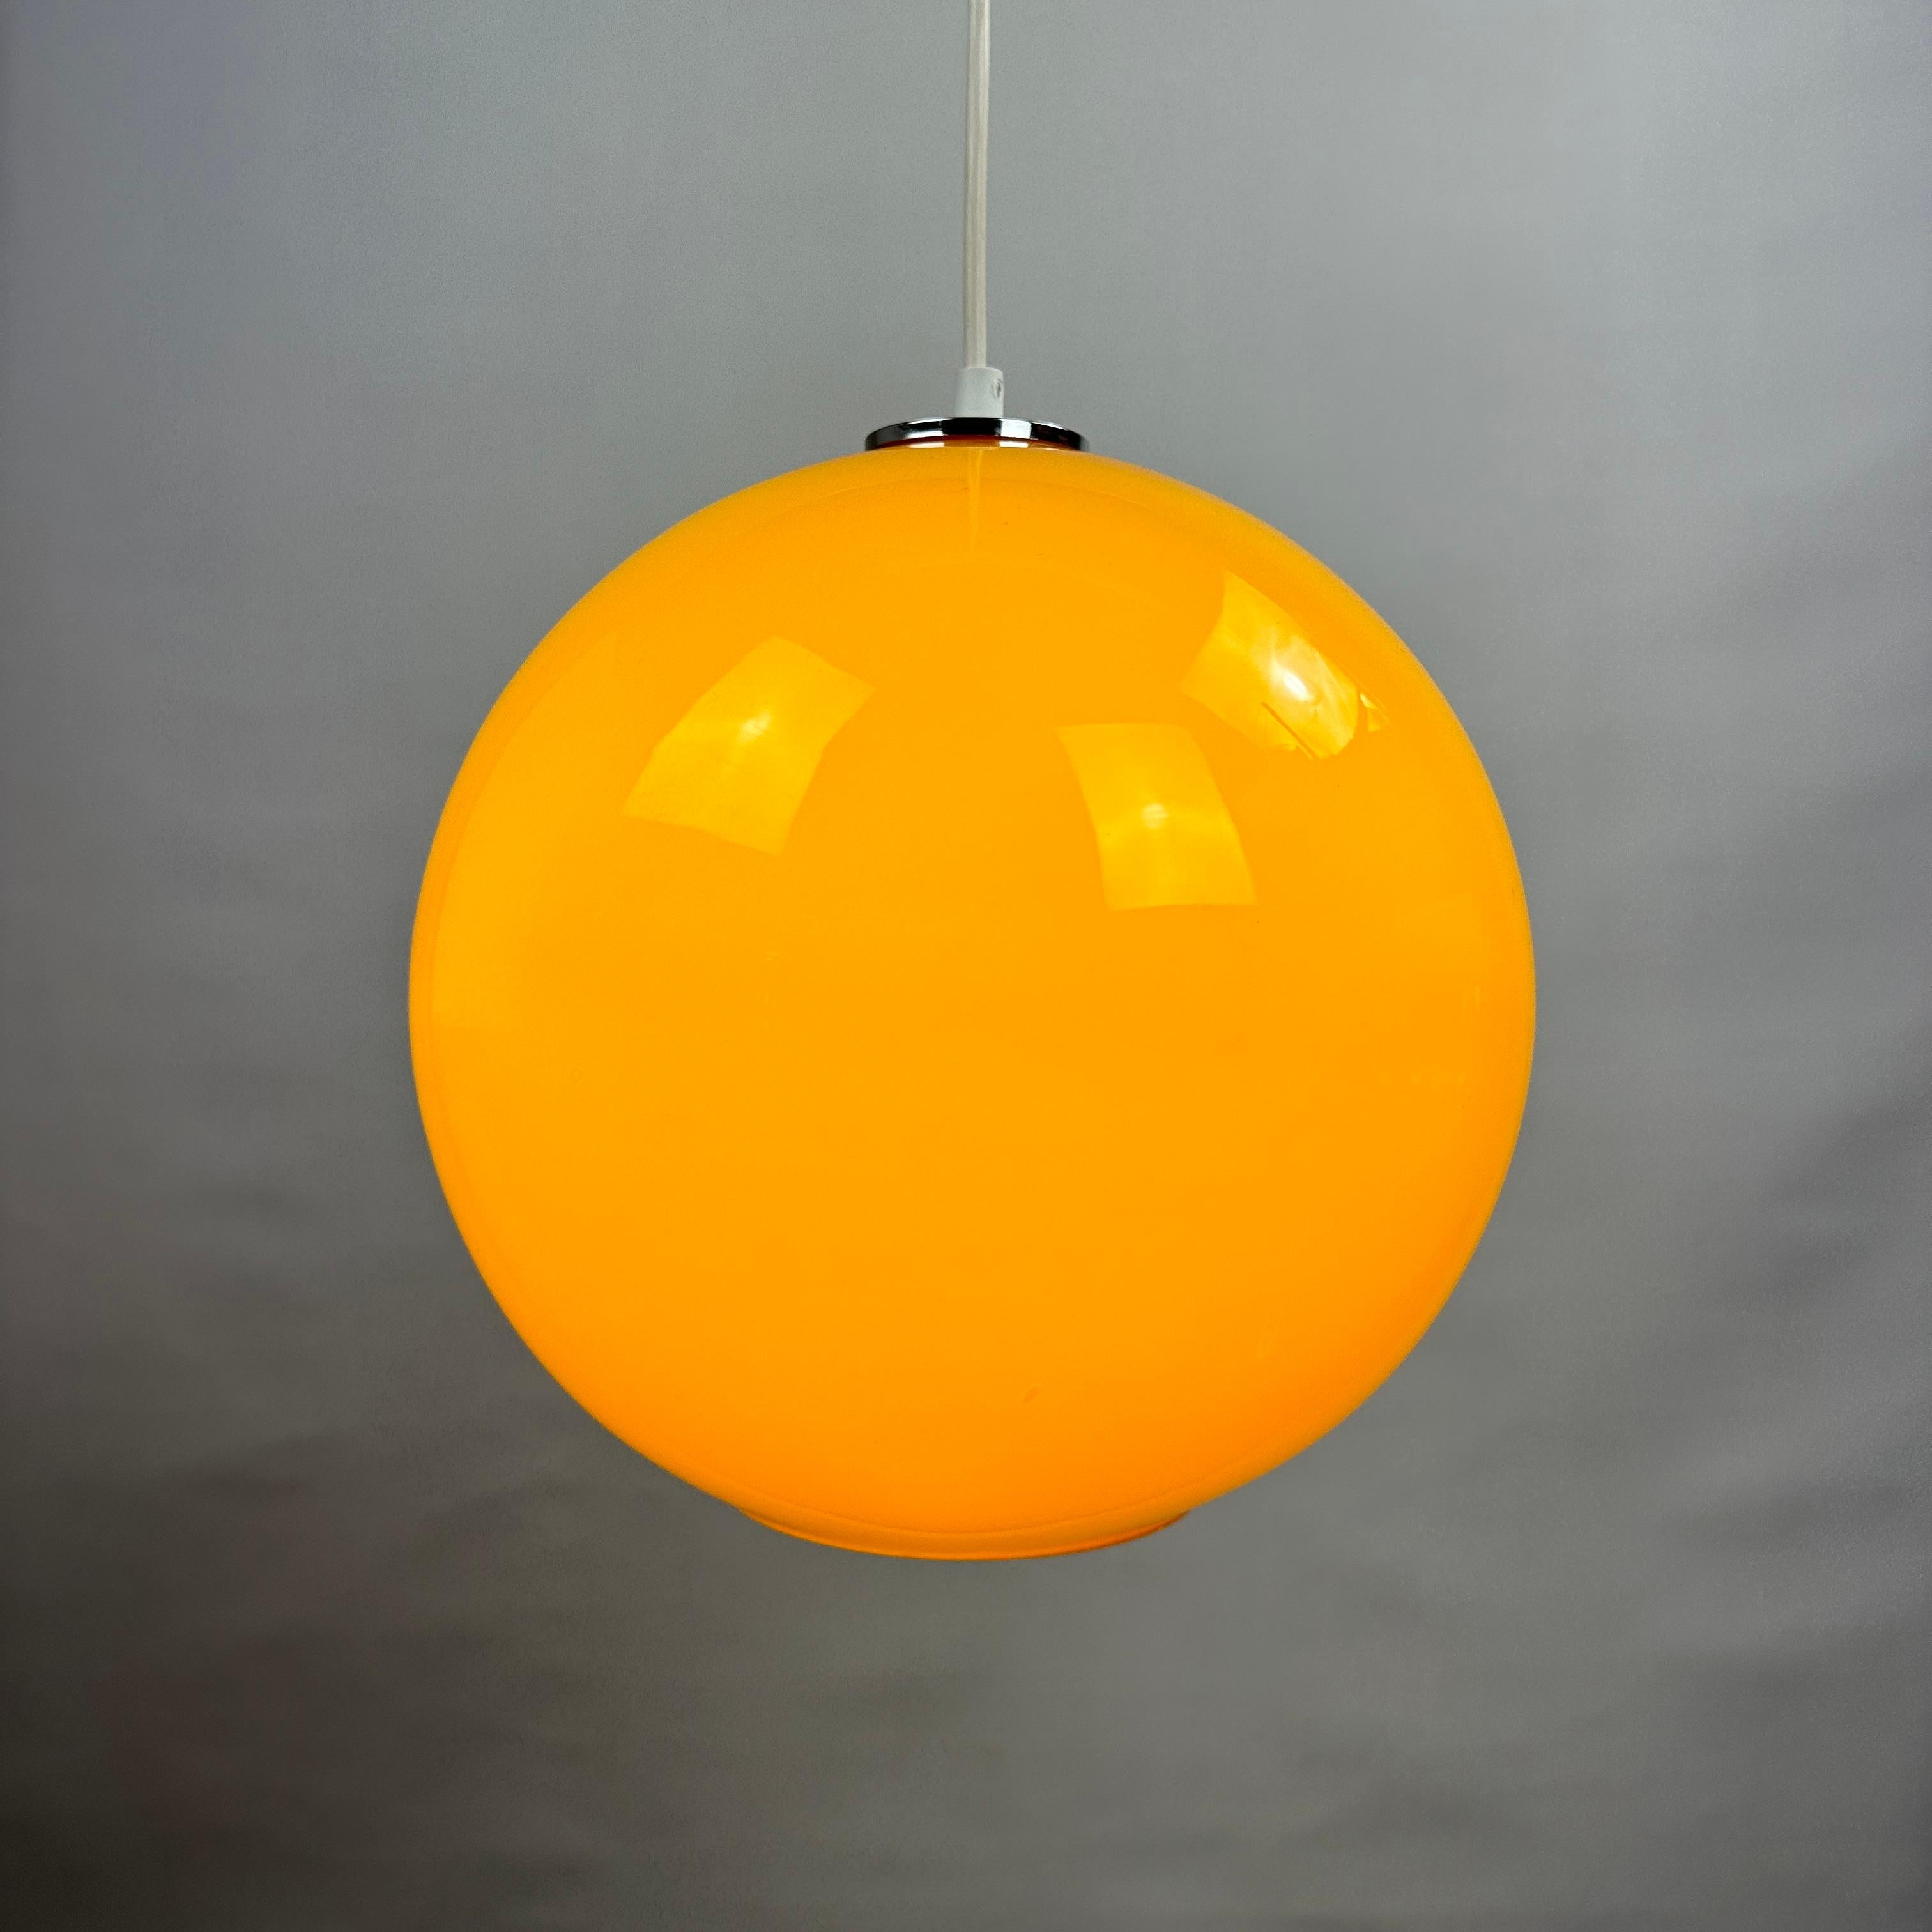 Cool large globe / sphere shaped yellow opaline glass pendant light is made by the German company Peill and Putzler around the 1960's. Has a yellow color and gives a very nice soft light.

Beautiful retro color but still fits in an everyday